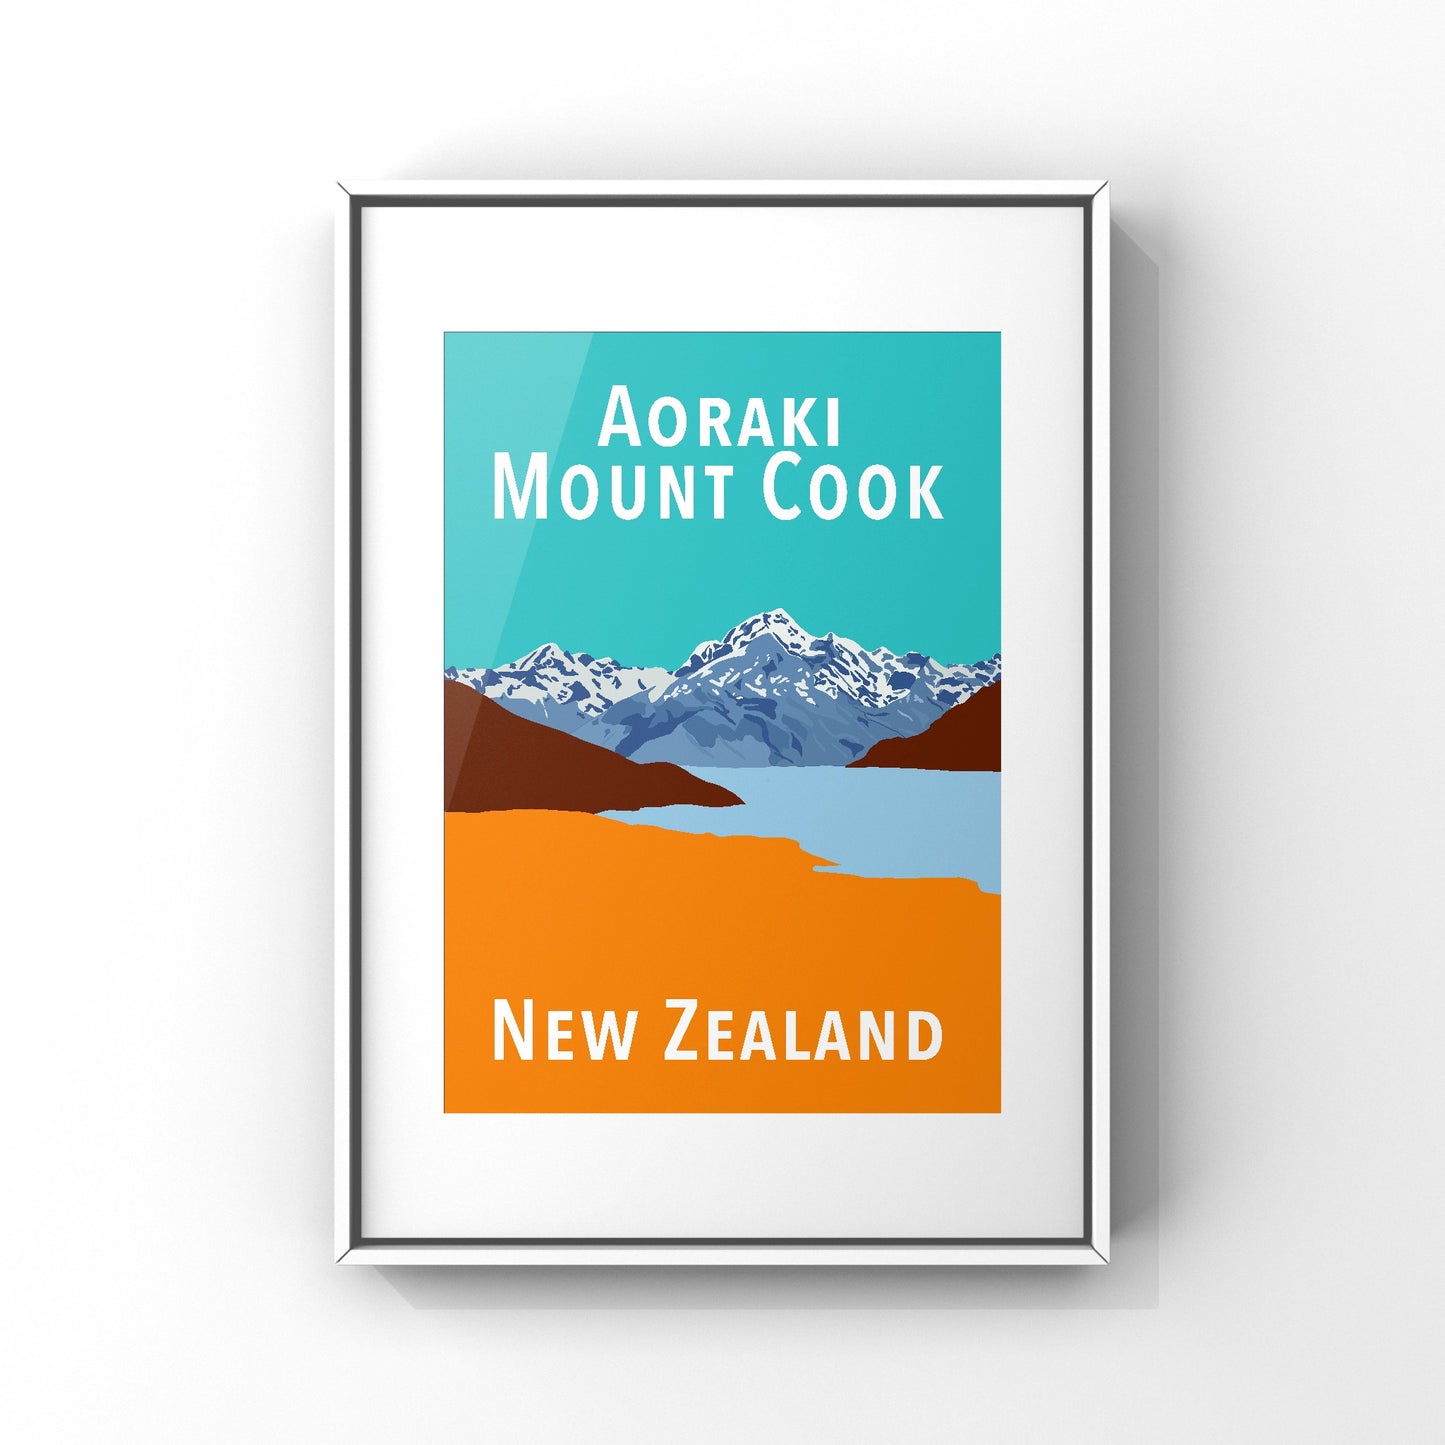 Mount Cook - in teal and orange poster